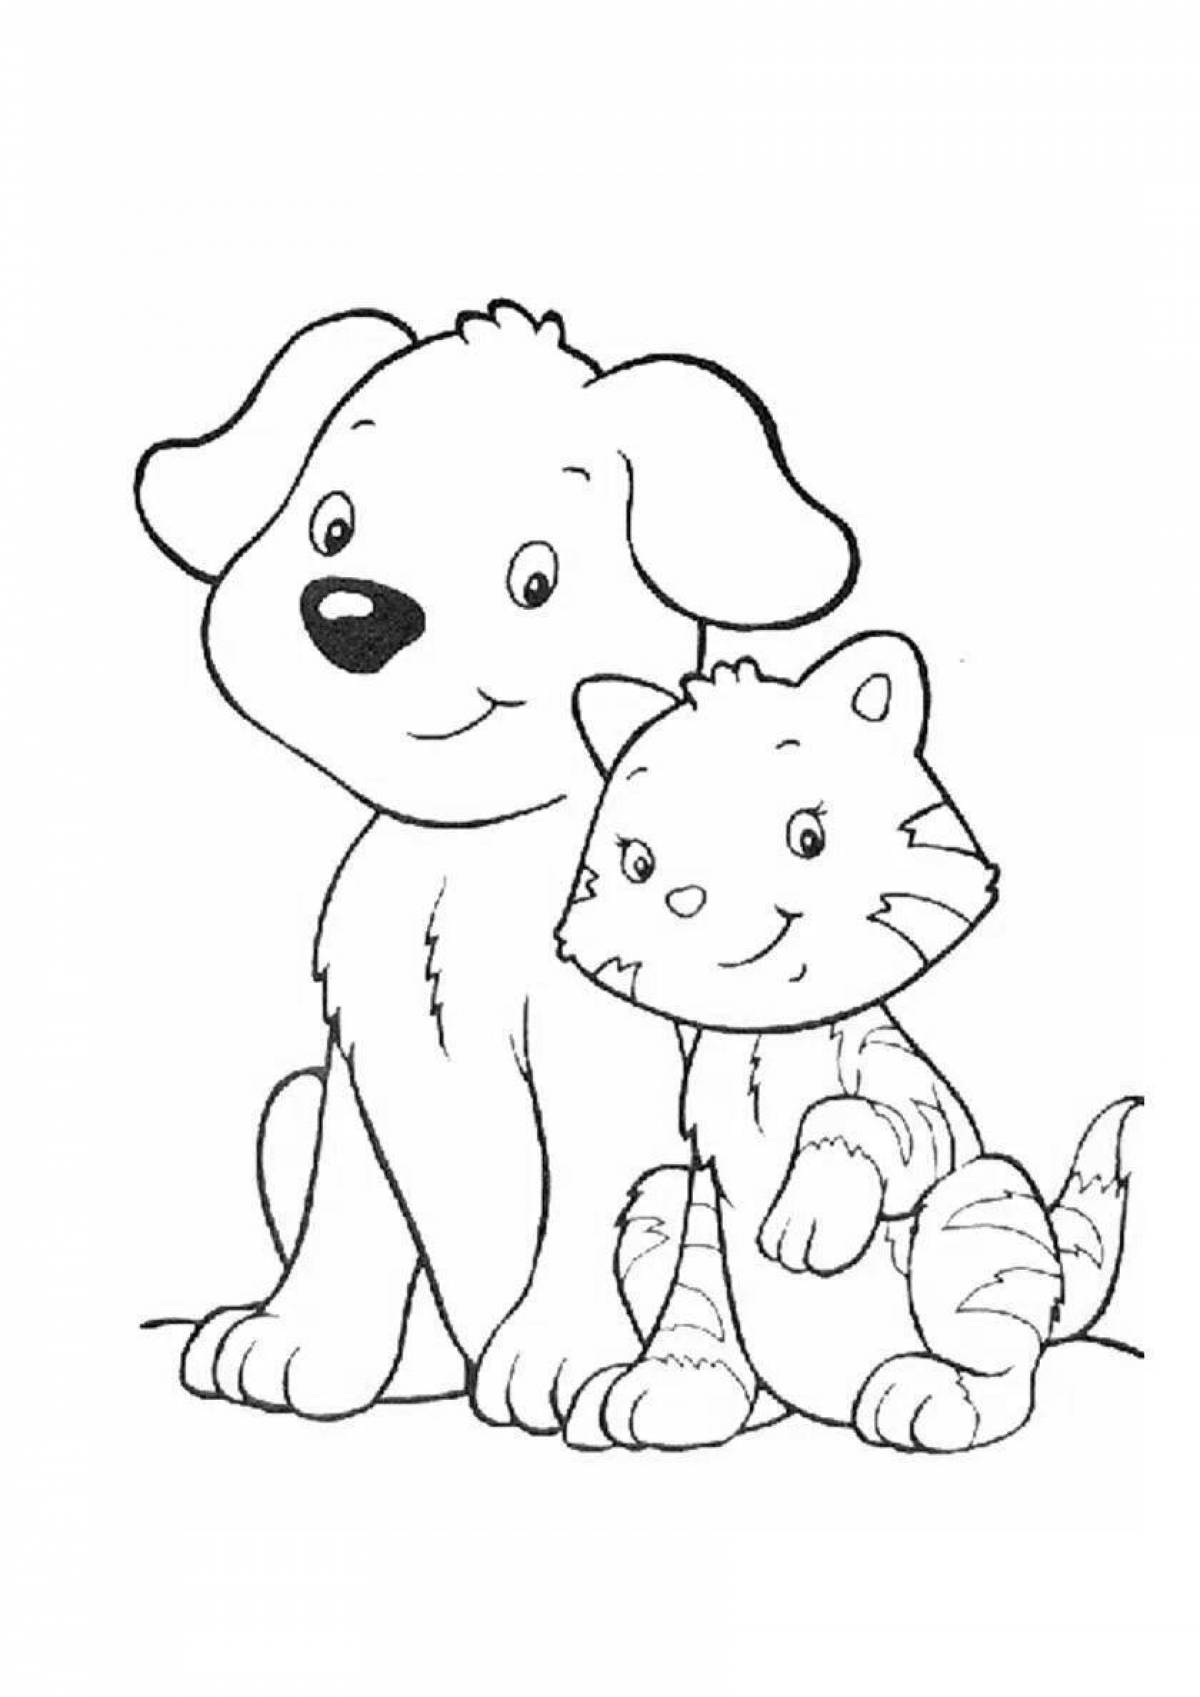 Attractive kitten and dog coloring